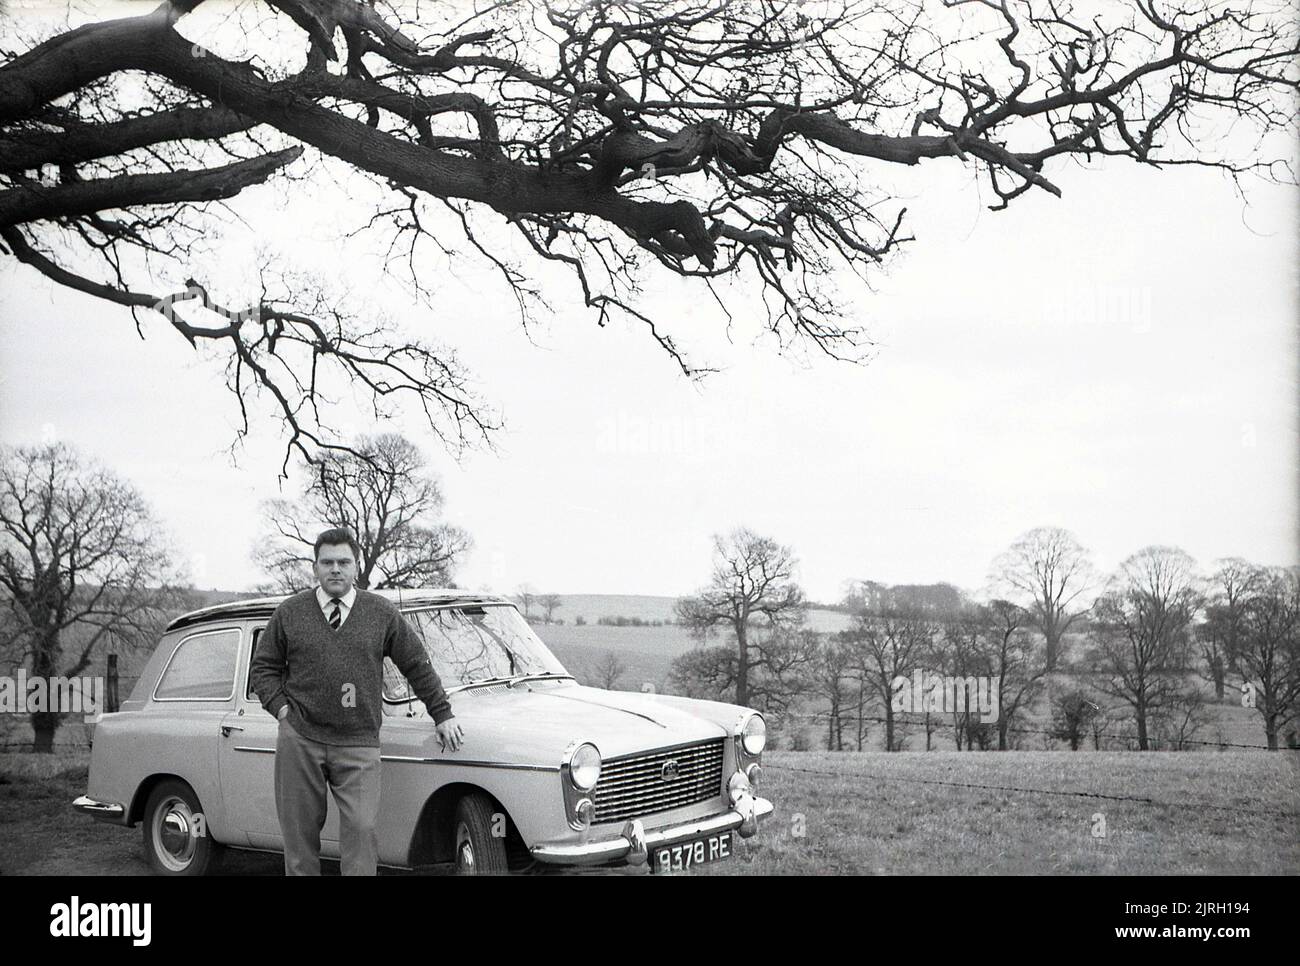 1958, historical, outside in the countryside, on a small farm lane, a man standing by an Austin A40 Farina car of the era, England, UK. A modern small car, with a distinctive 'two box' shape and headroom in the back seat, it was a look created by notable Italian automobile designer Battista Farina, famous for his work with Ferrari and the Alfa Romeo Spider. The car was produced up to 1967, when it was succeeded by the Austin 1100. Stock Photo